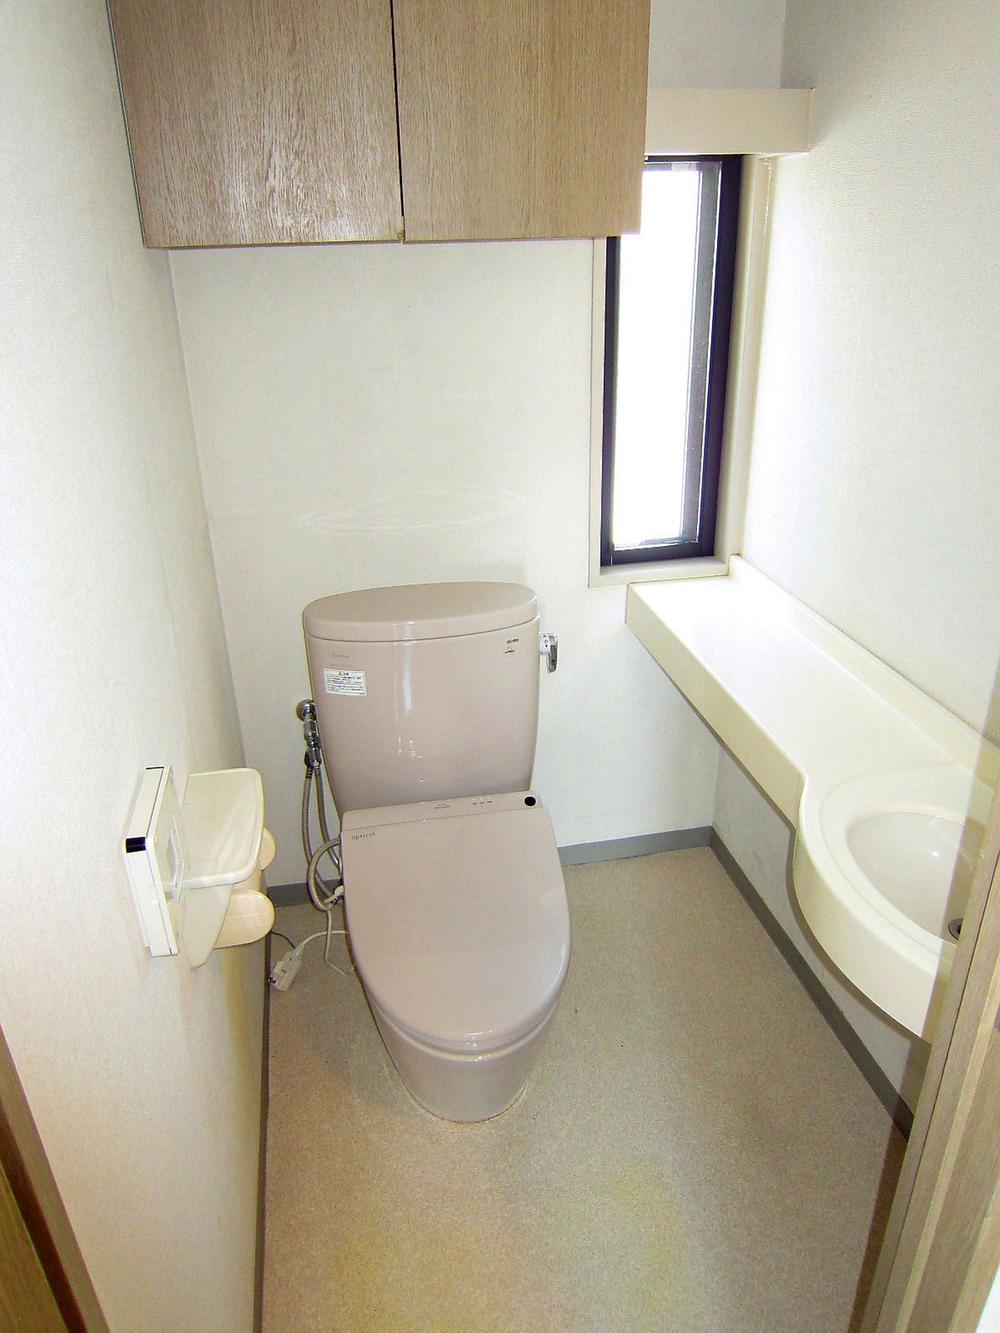 Toilet. Of course, Toilet is equipped with Washlet.